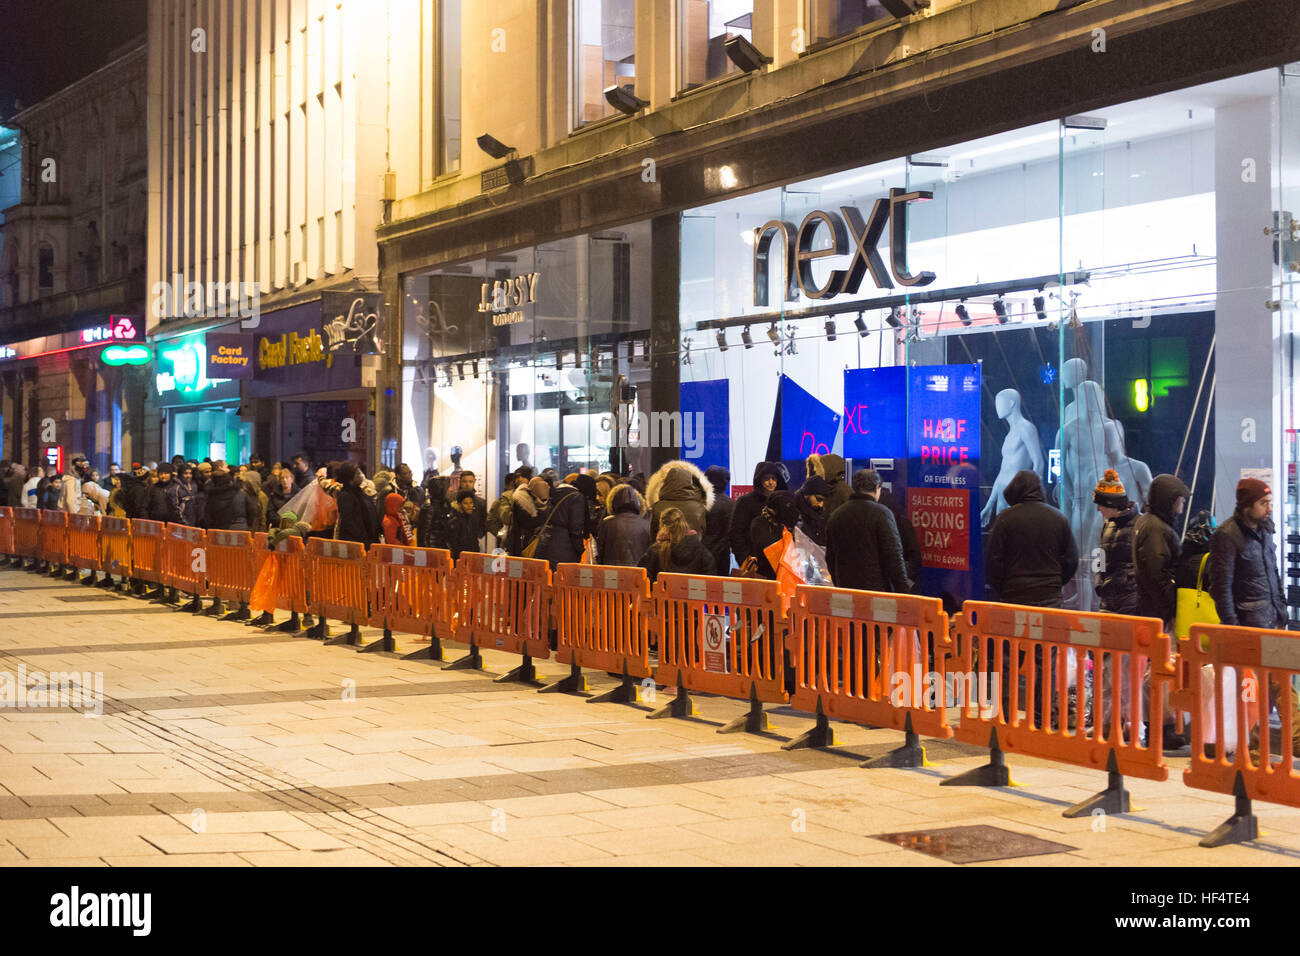 Shoppers queue outside the Next store on Queen Street, Cardiff, from 1am for the Next boxing day sale. Stock Photo